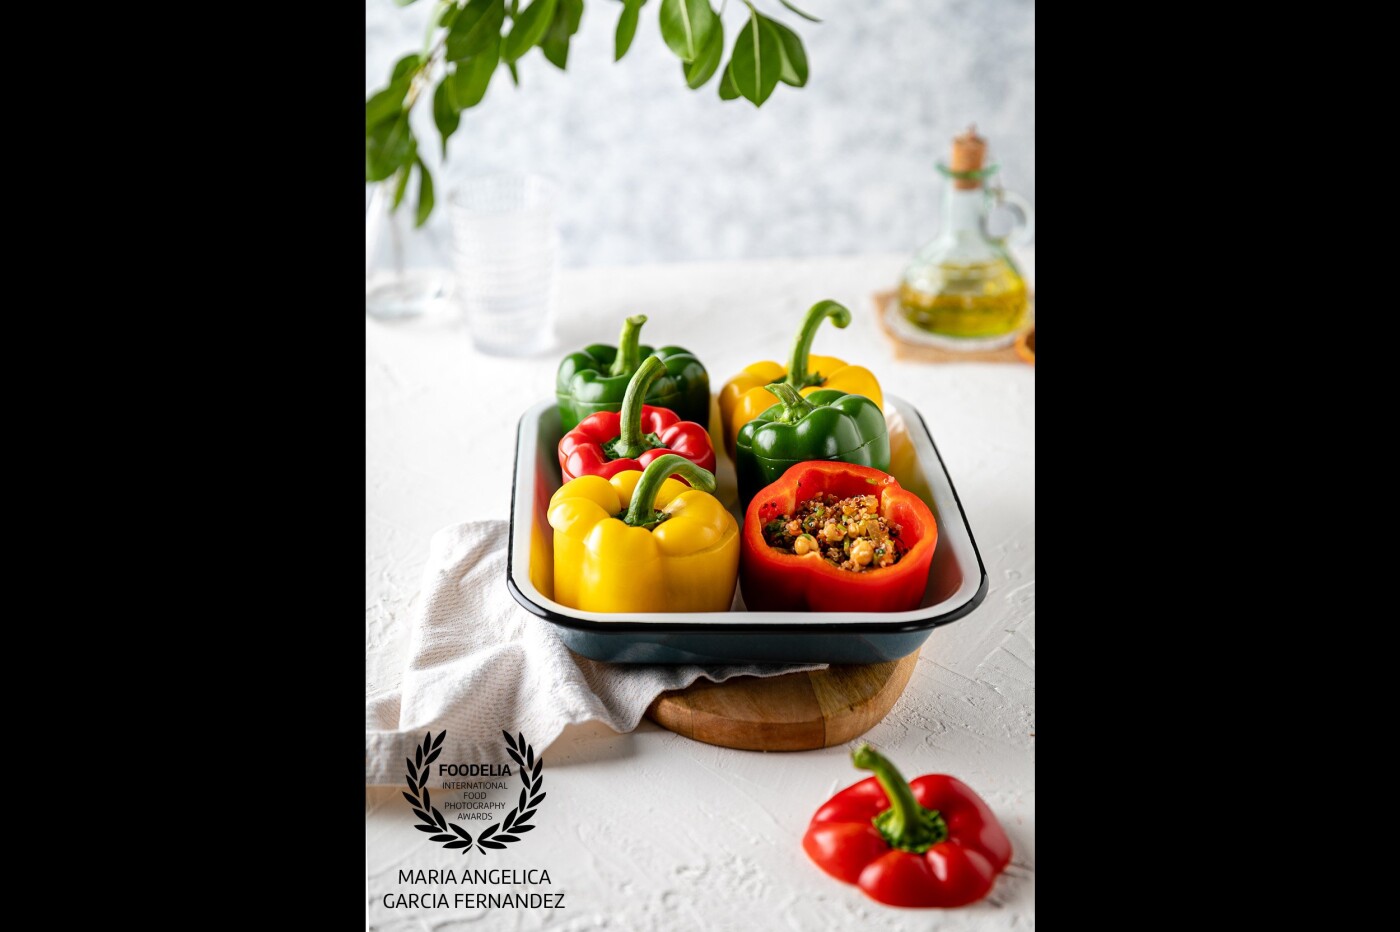 Quinoa and chickpea stuffed Bell Pepper, my last blog post as a healthy recipe idea for small gatherings during the upcoming and unusual holiday season.